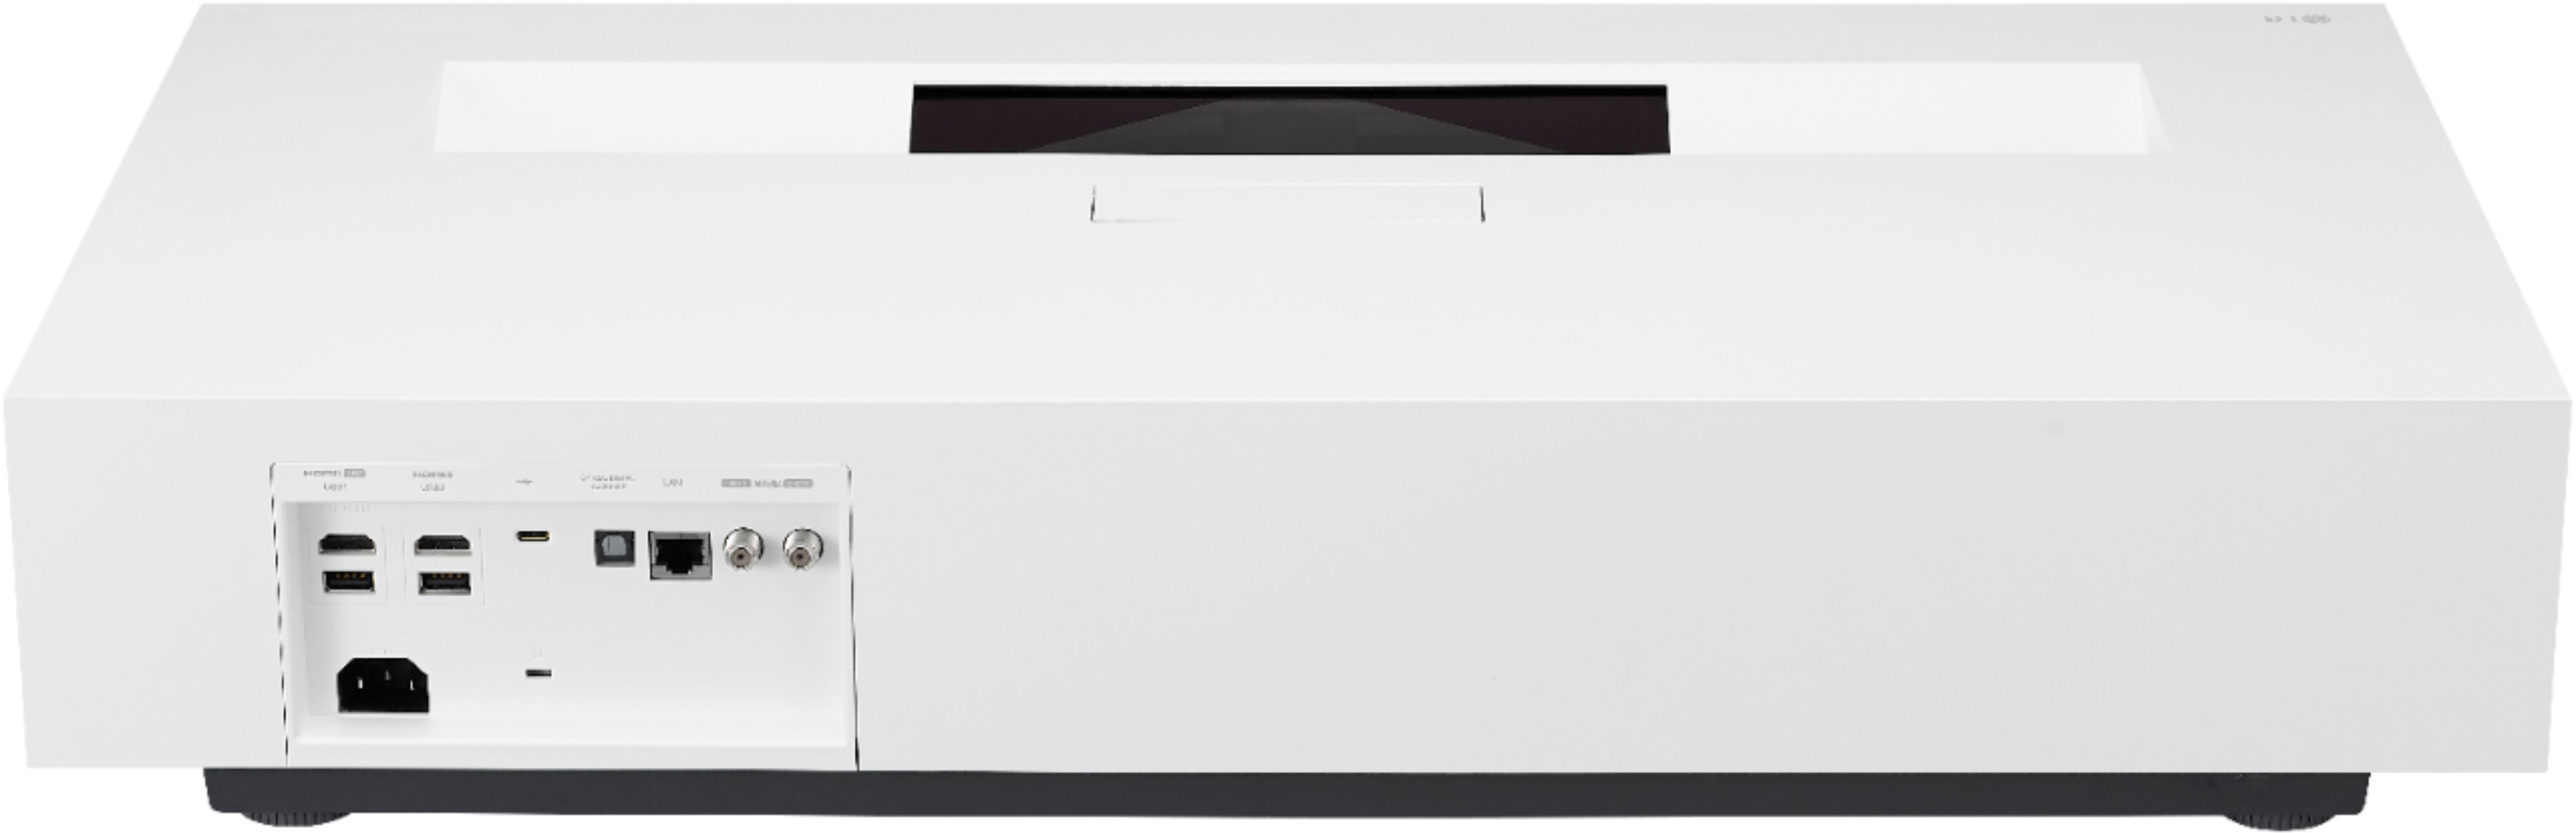 Back View: LG - STUDIO 30" Built-In Electric Cooktop with 5 Elements, Hot Surface Indicator and Warming Zone - Stainless steel